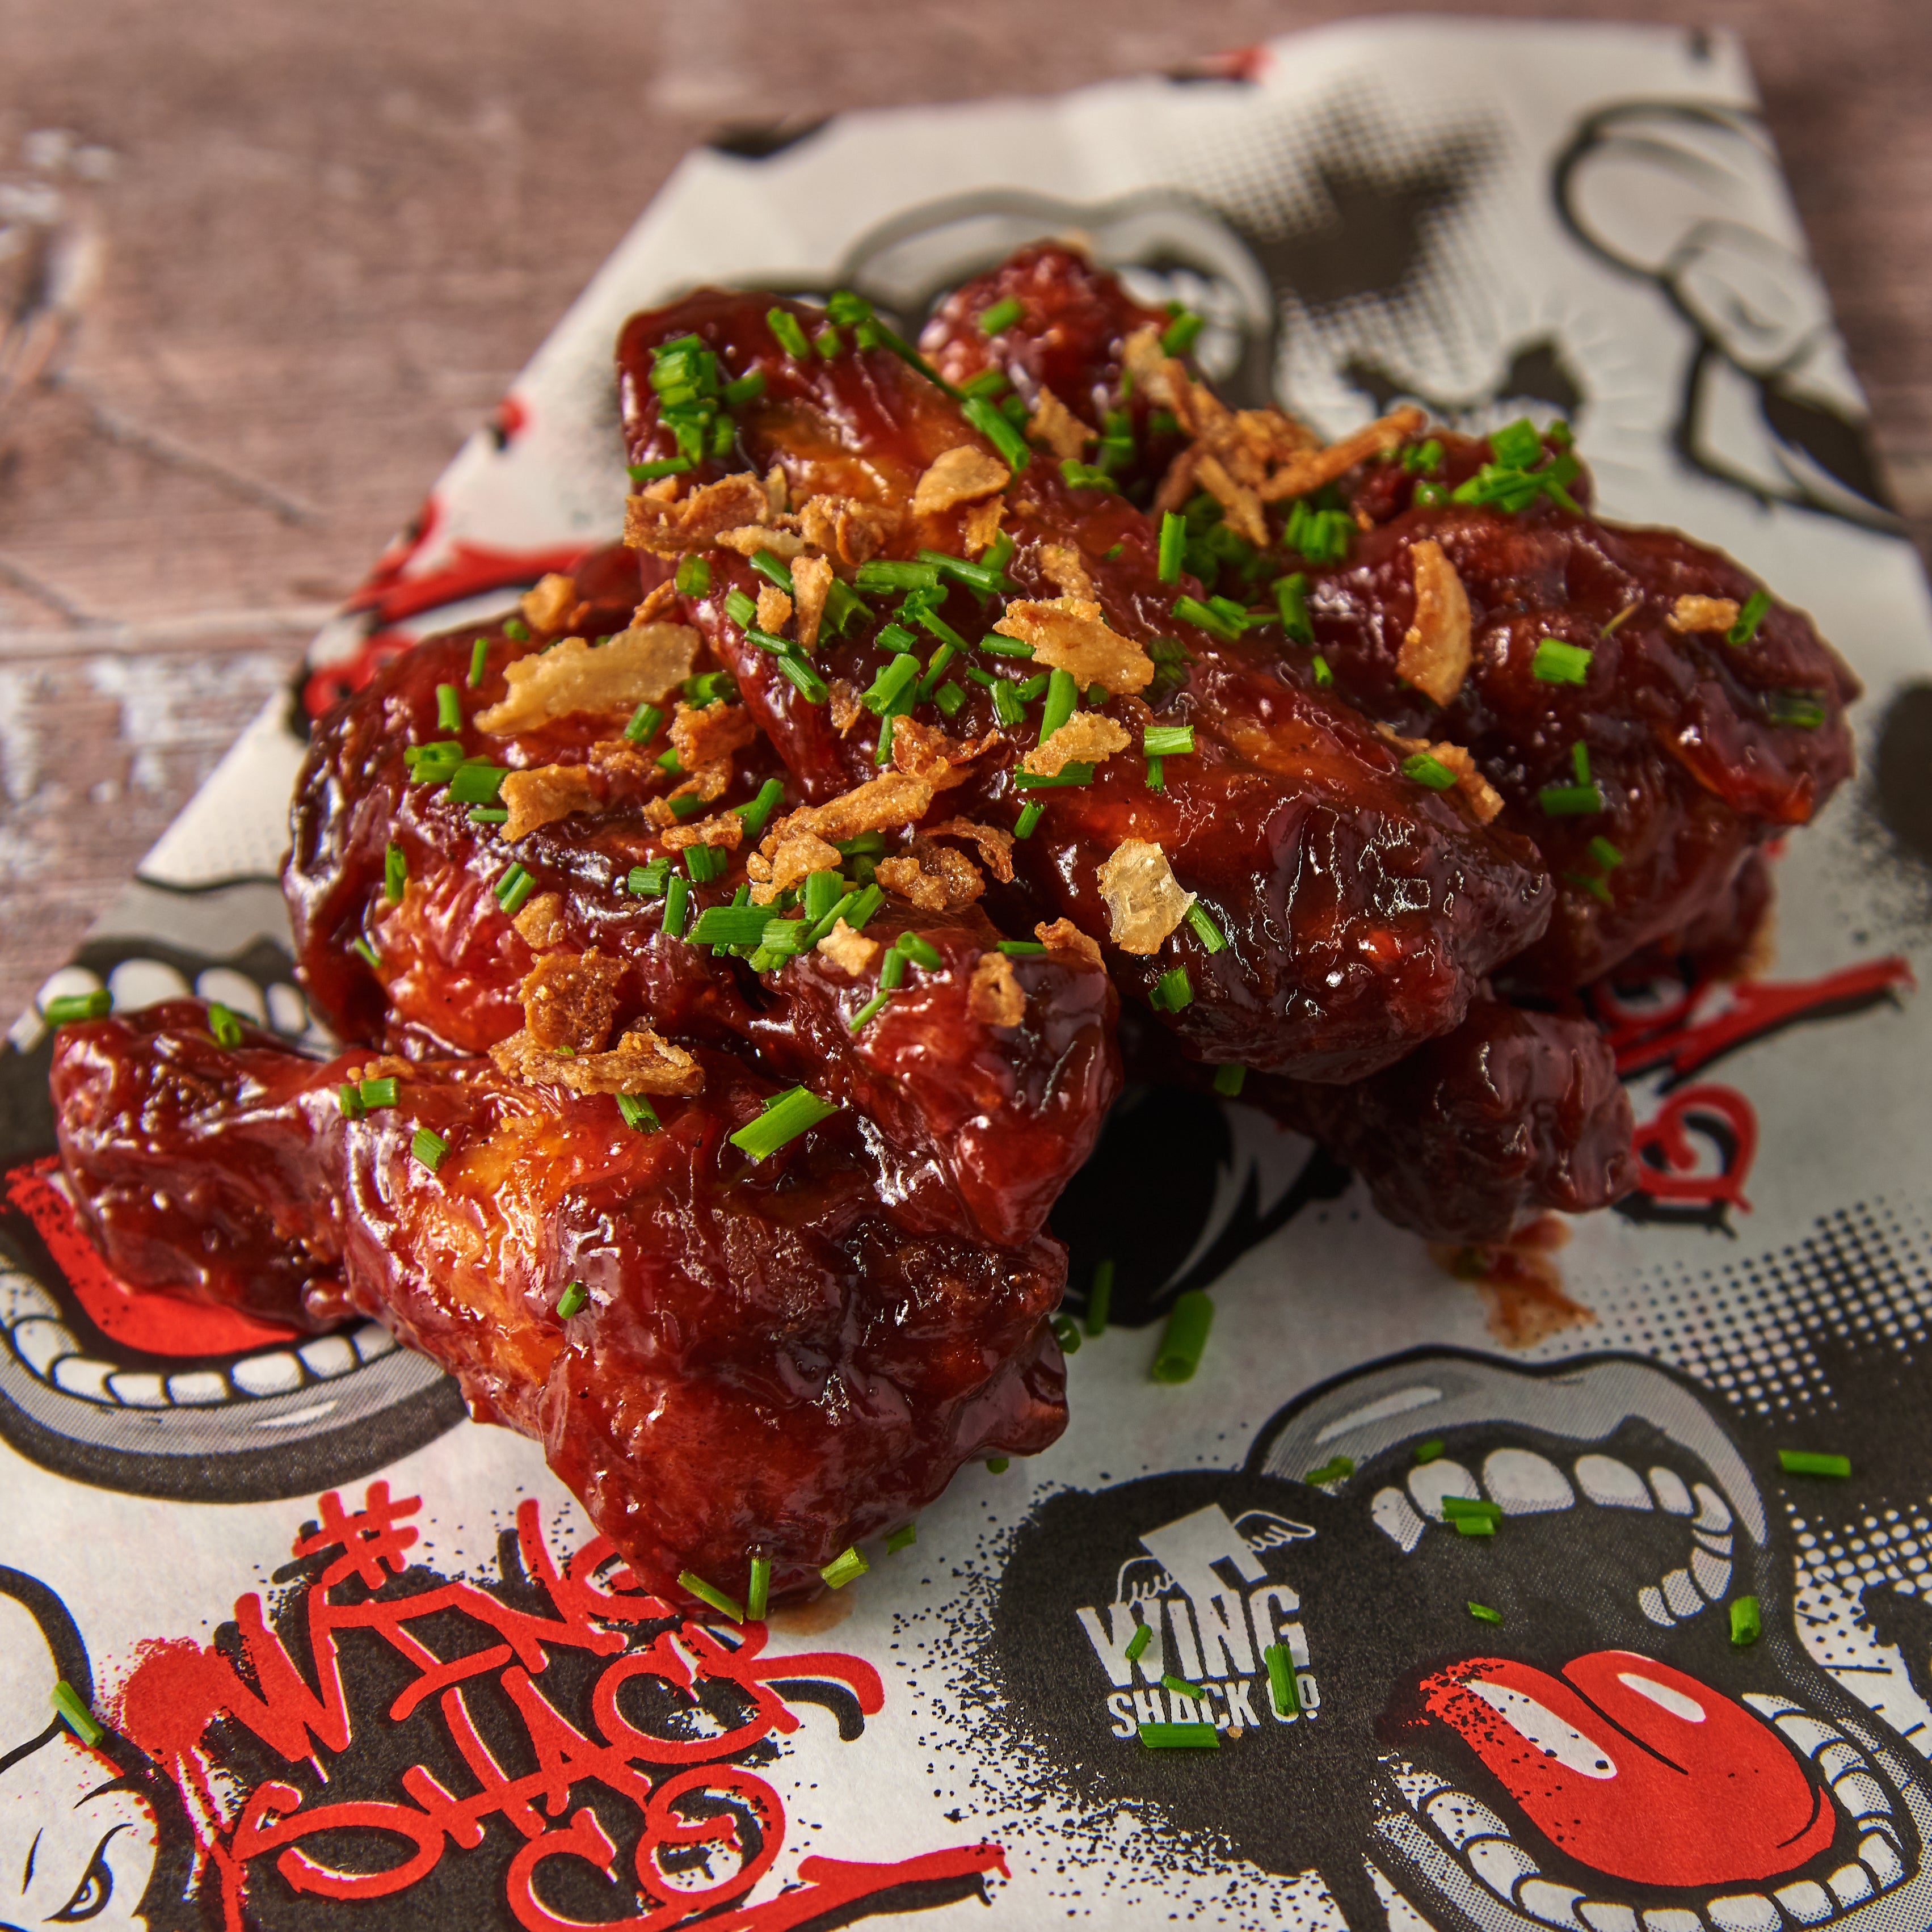 Wing Shack specialises in wings the American way